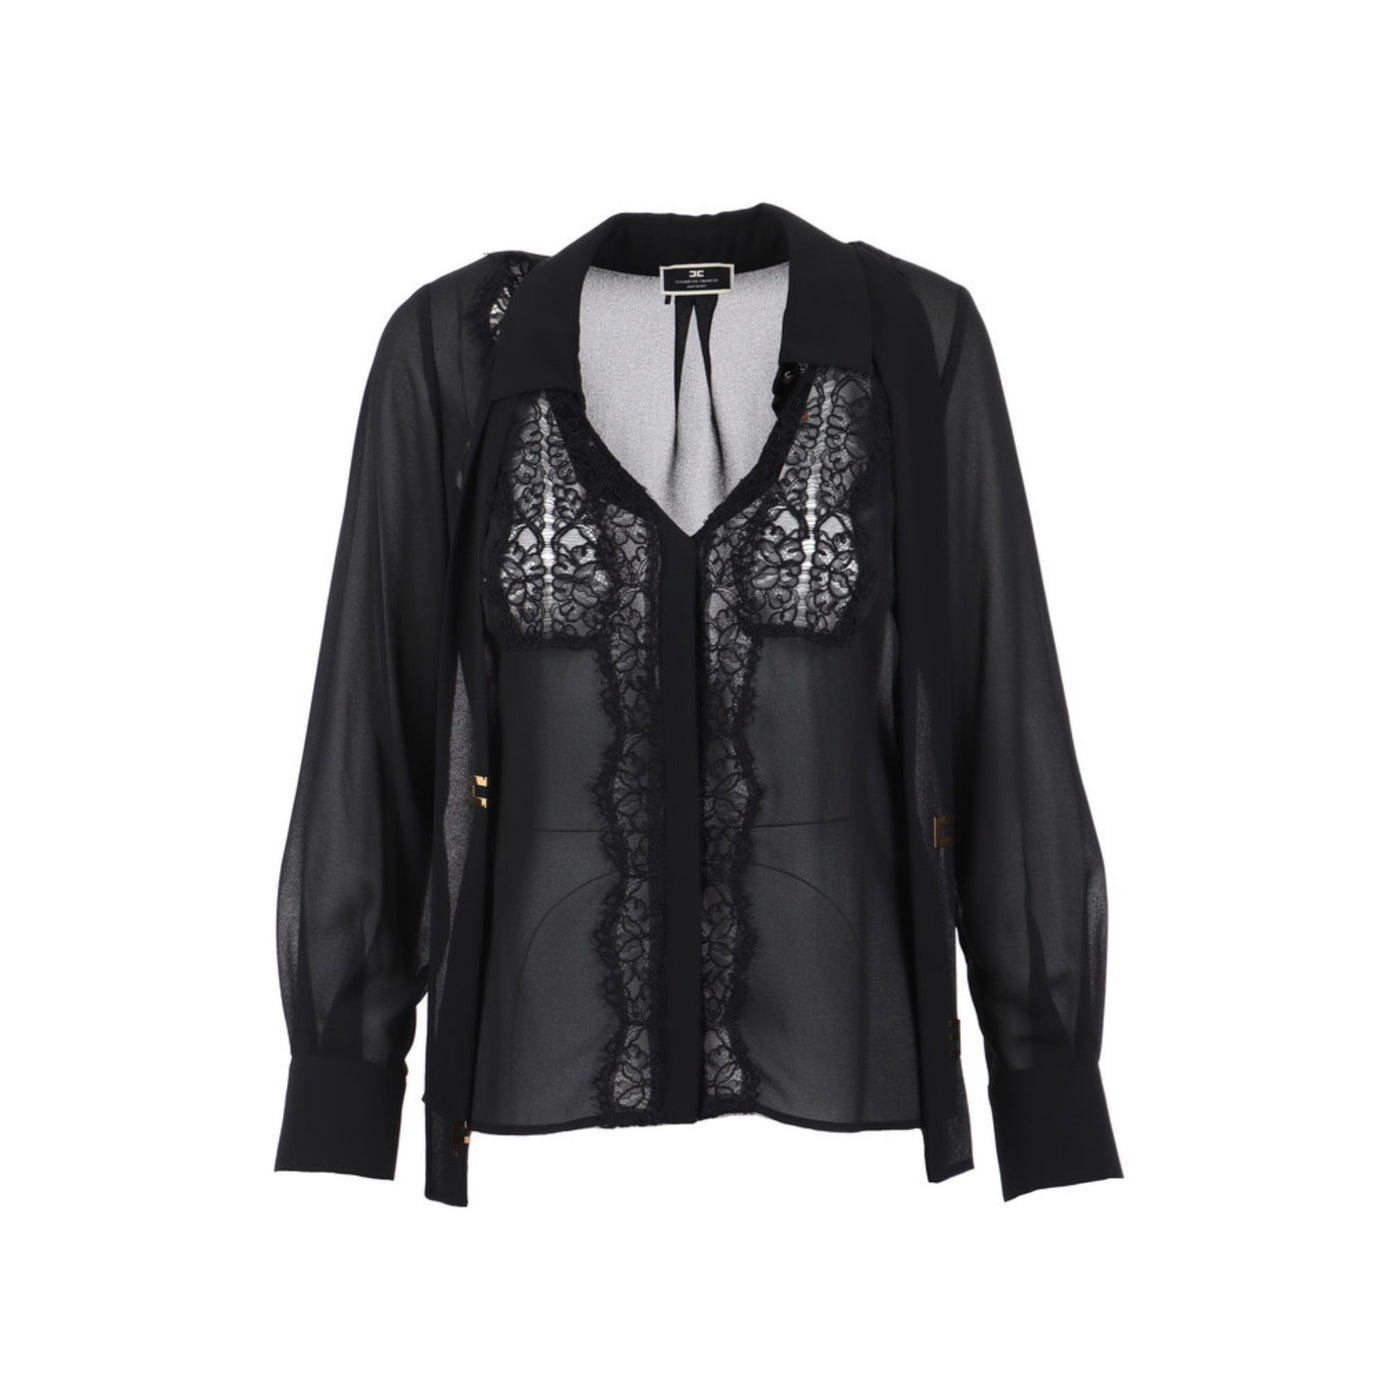 Women's shirt with lace